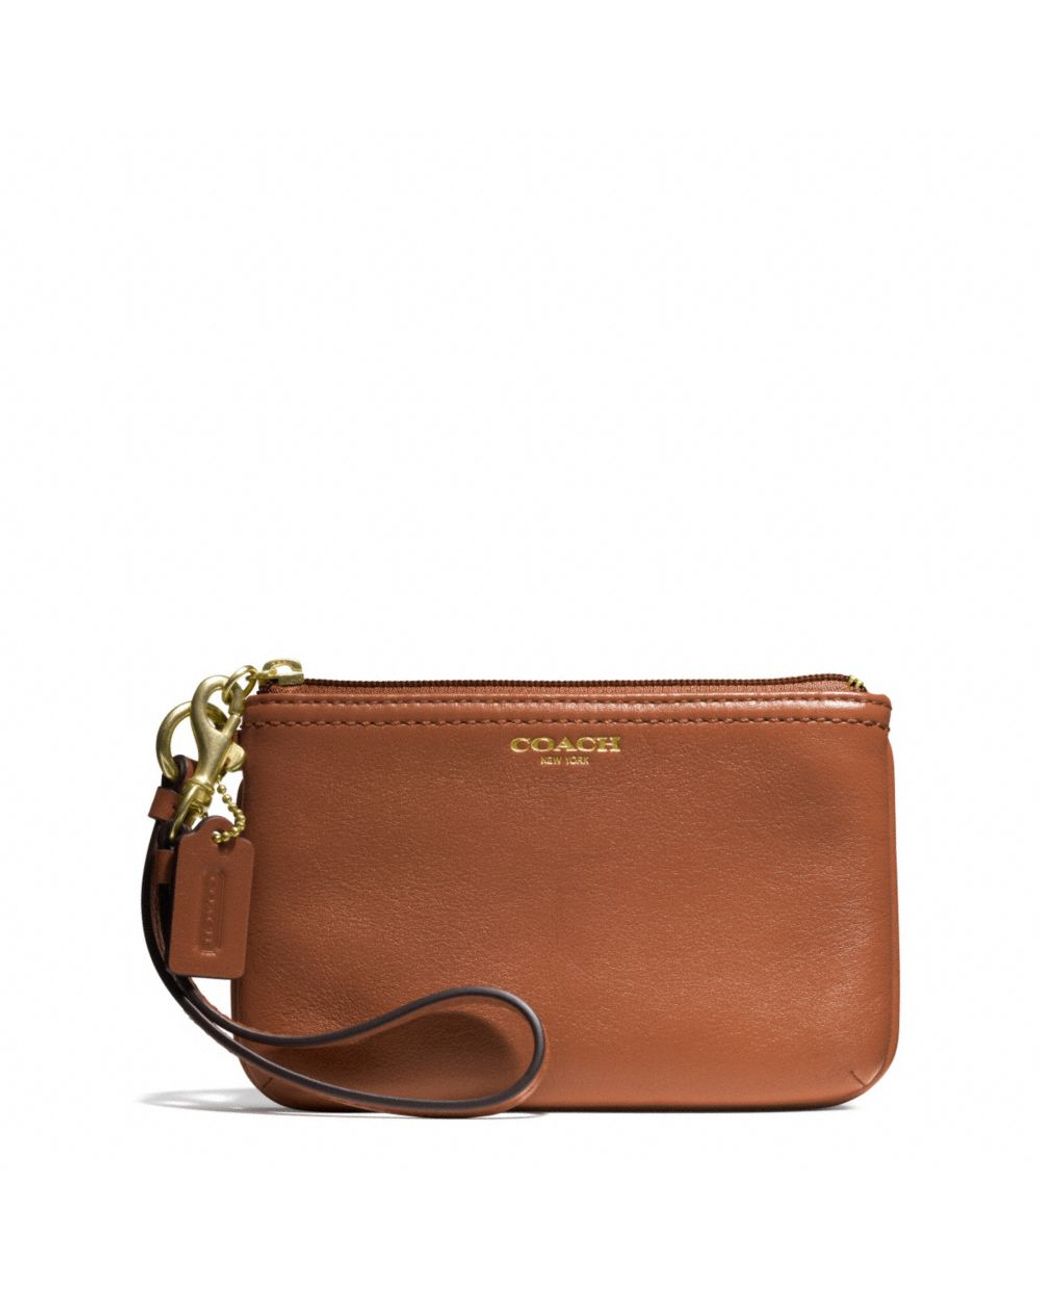 COACH Small Wristlet in Leather in Brown | Lyst